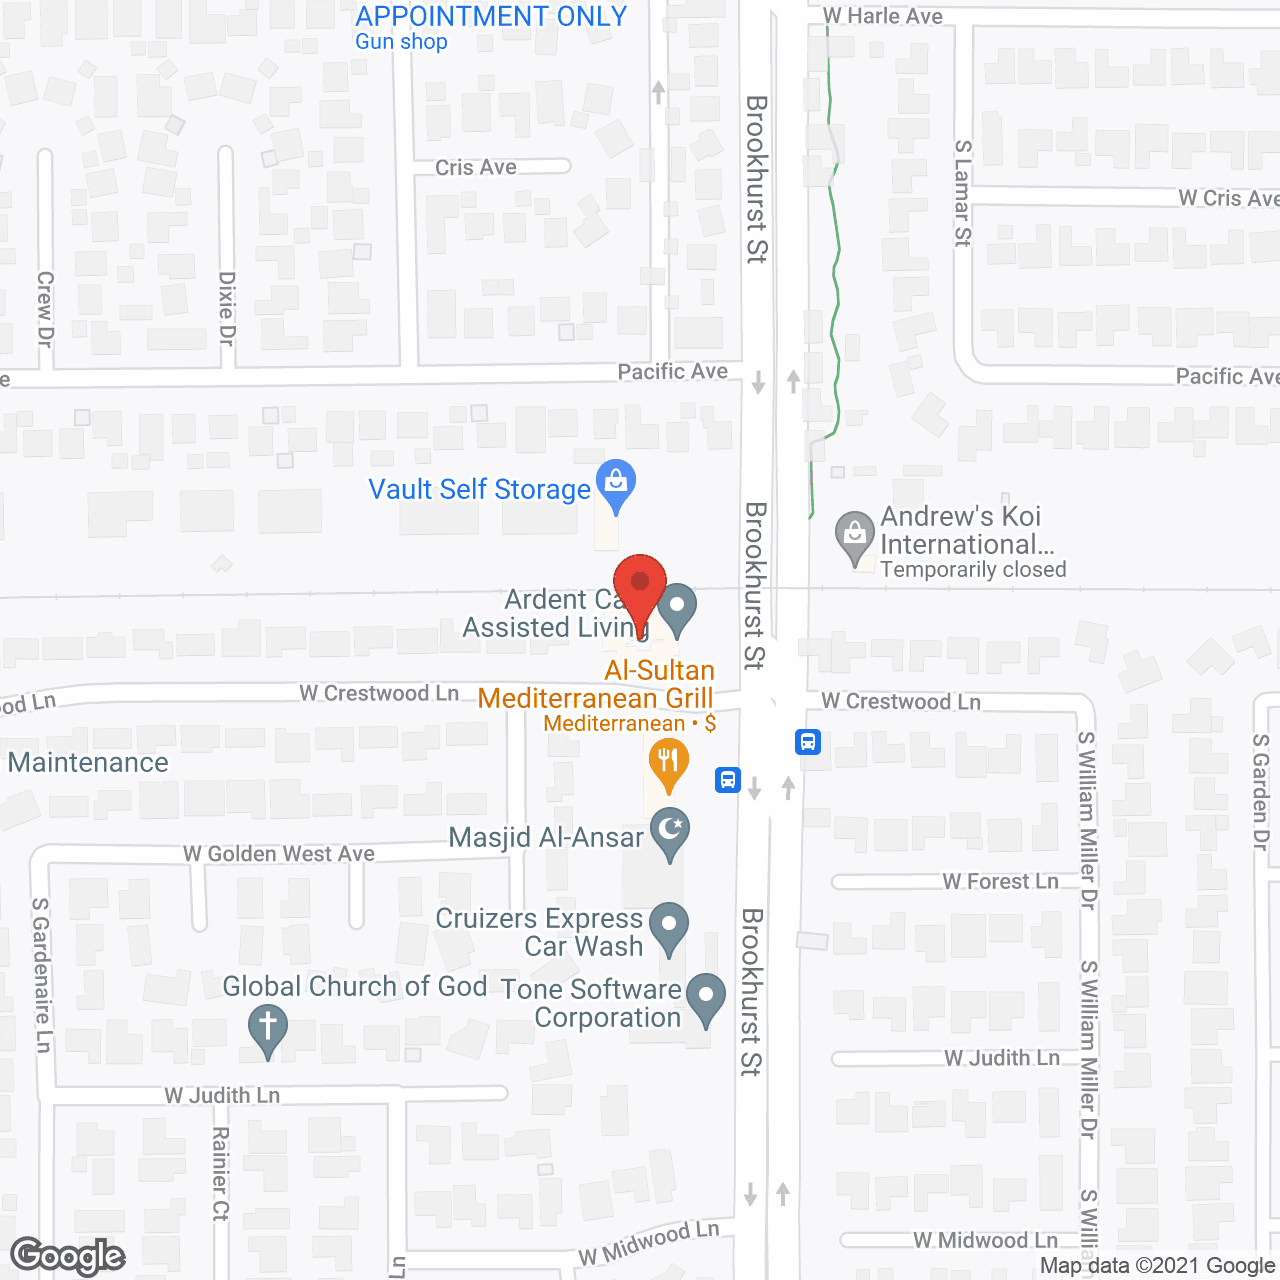 Ardent Care Assisted Living in google map